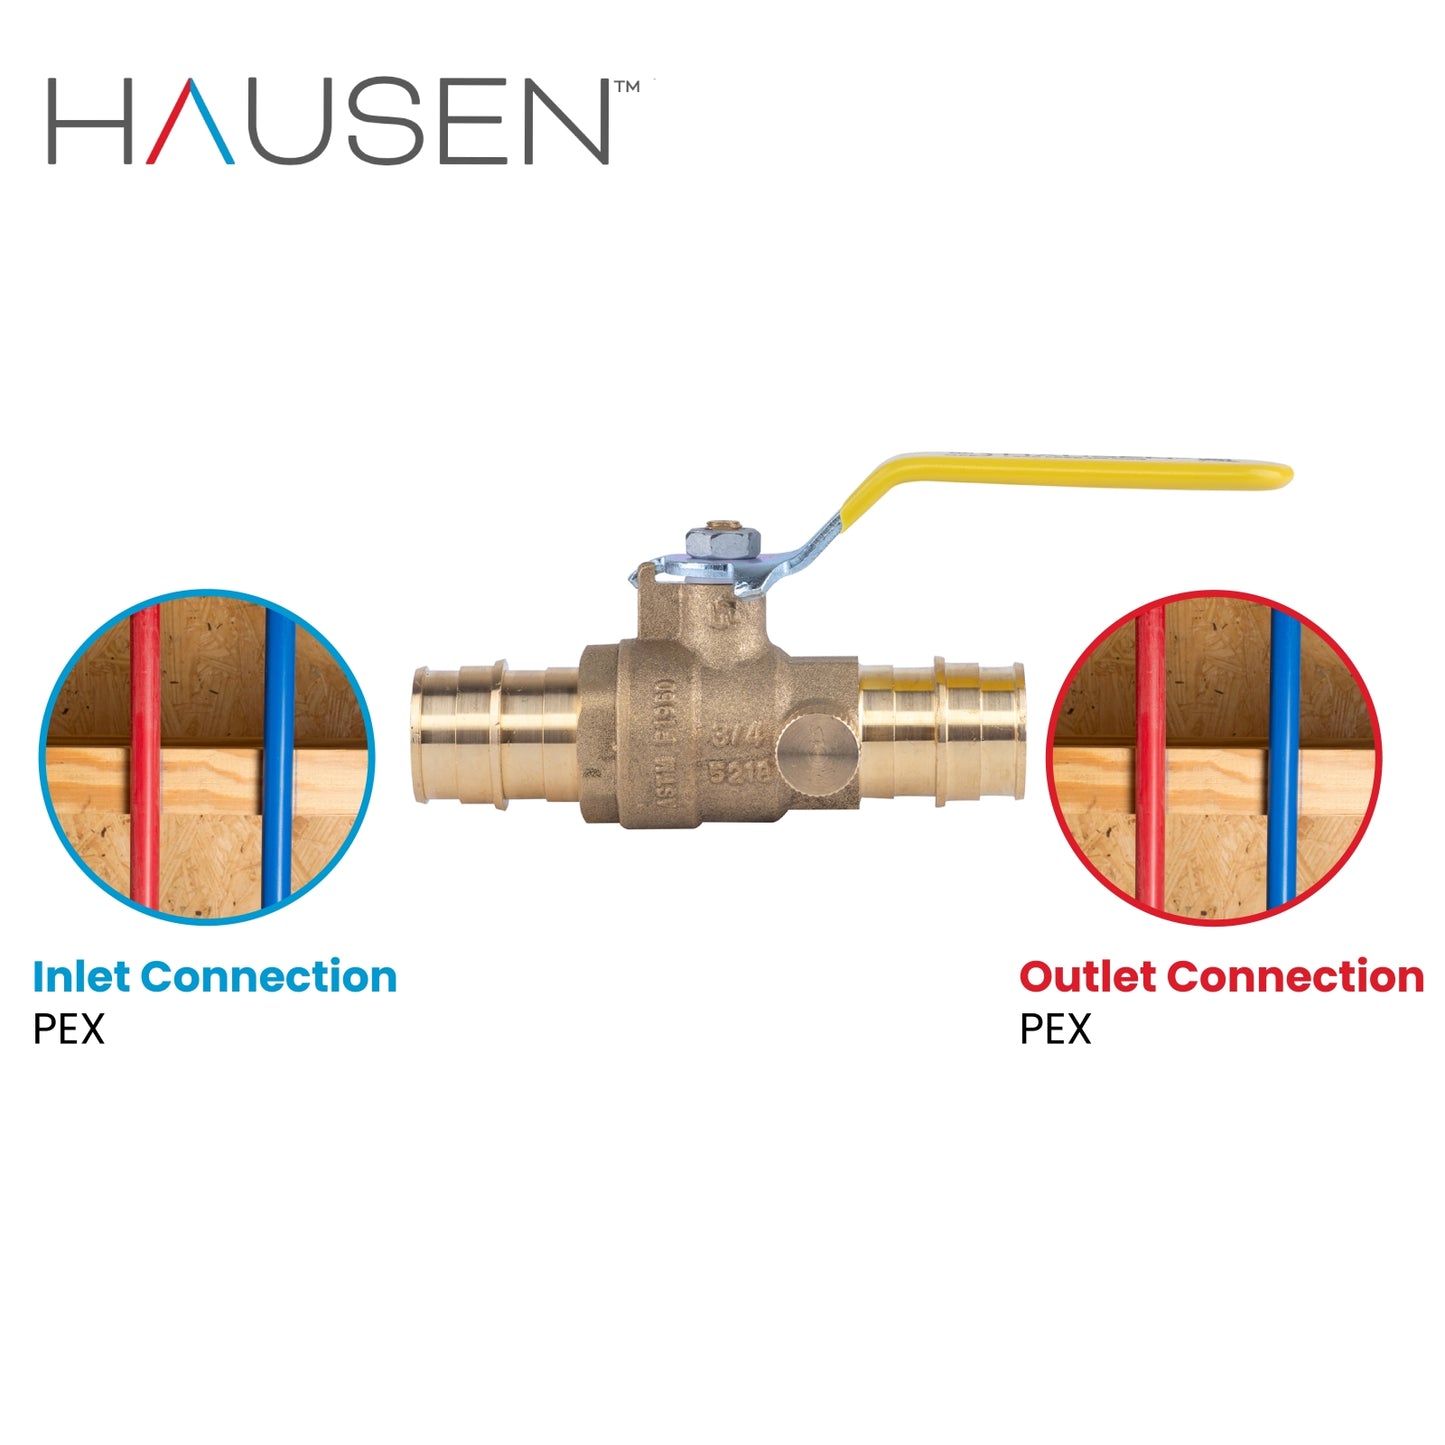 Hausen 3/4-inch PEX Standard Port Brass Ball Valve with Drain; Lead Free Forged Brass; Blowout Resistant Stem; cUPC/ANSI/NSF Certified; For Use in Potable Water, Oil and Gas Distribution Systems, 10-Pack